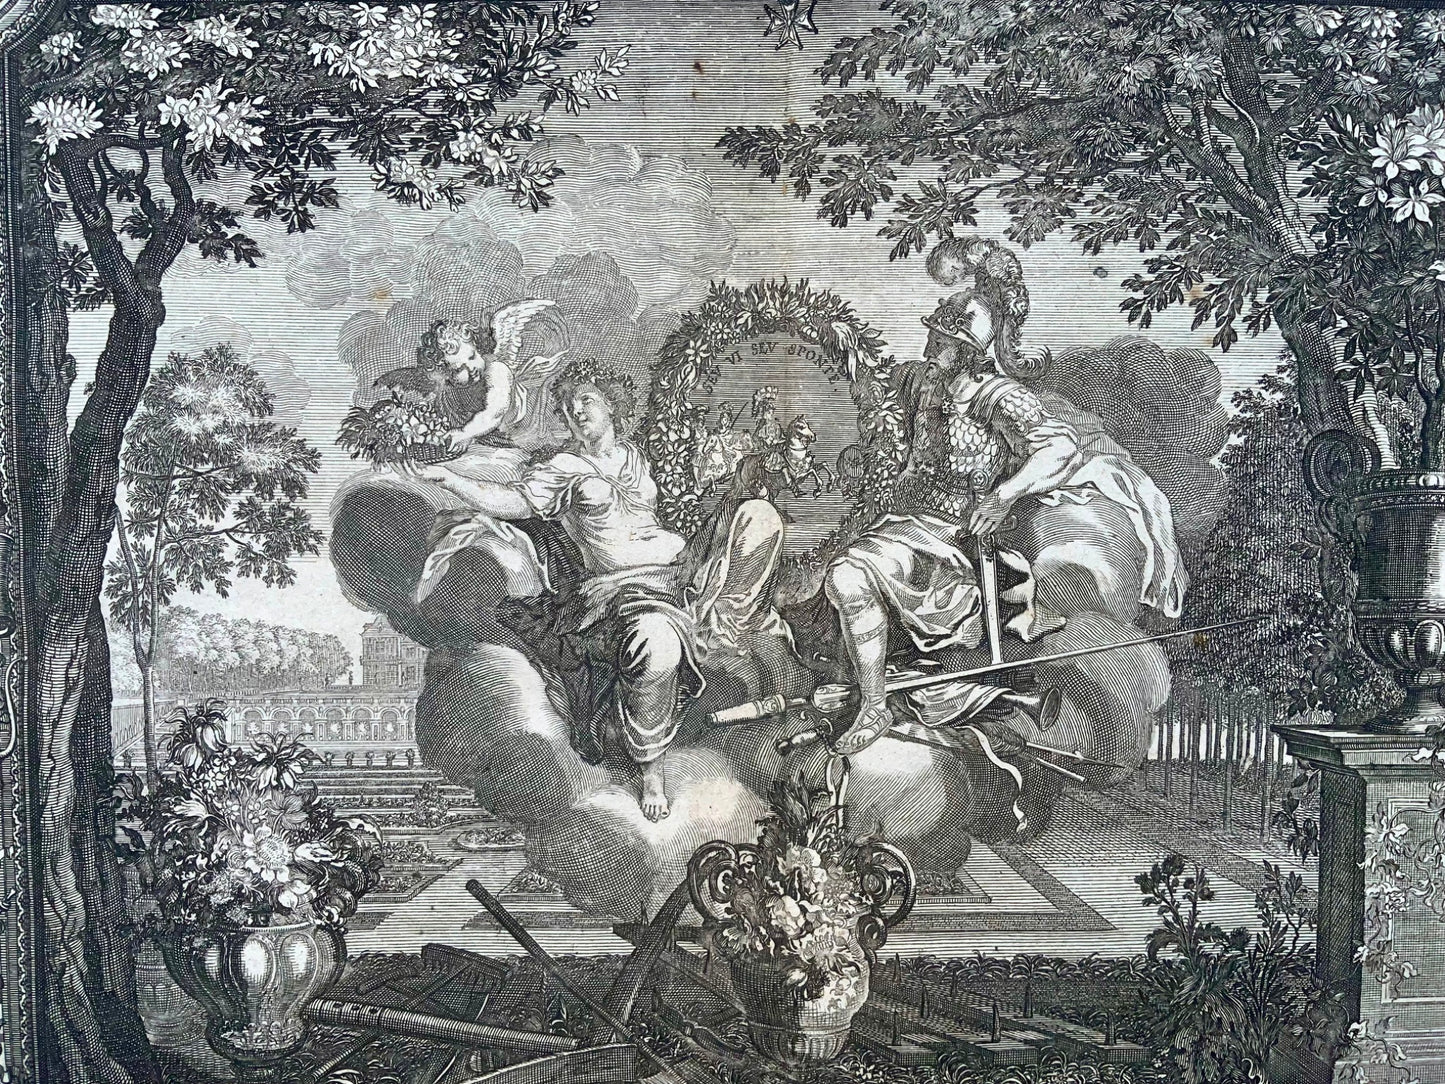 1679 Spring, double page allegorical tapestry engraving, Le Brun; Le Clerc, bota